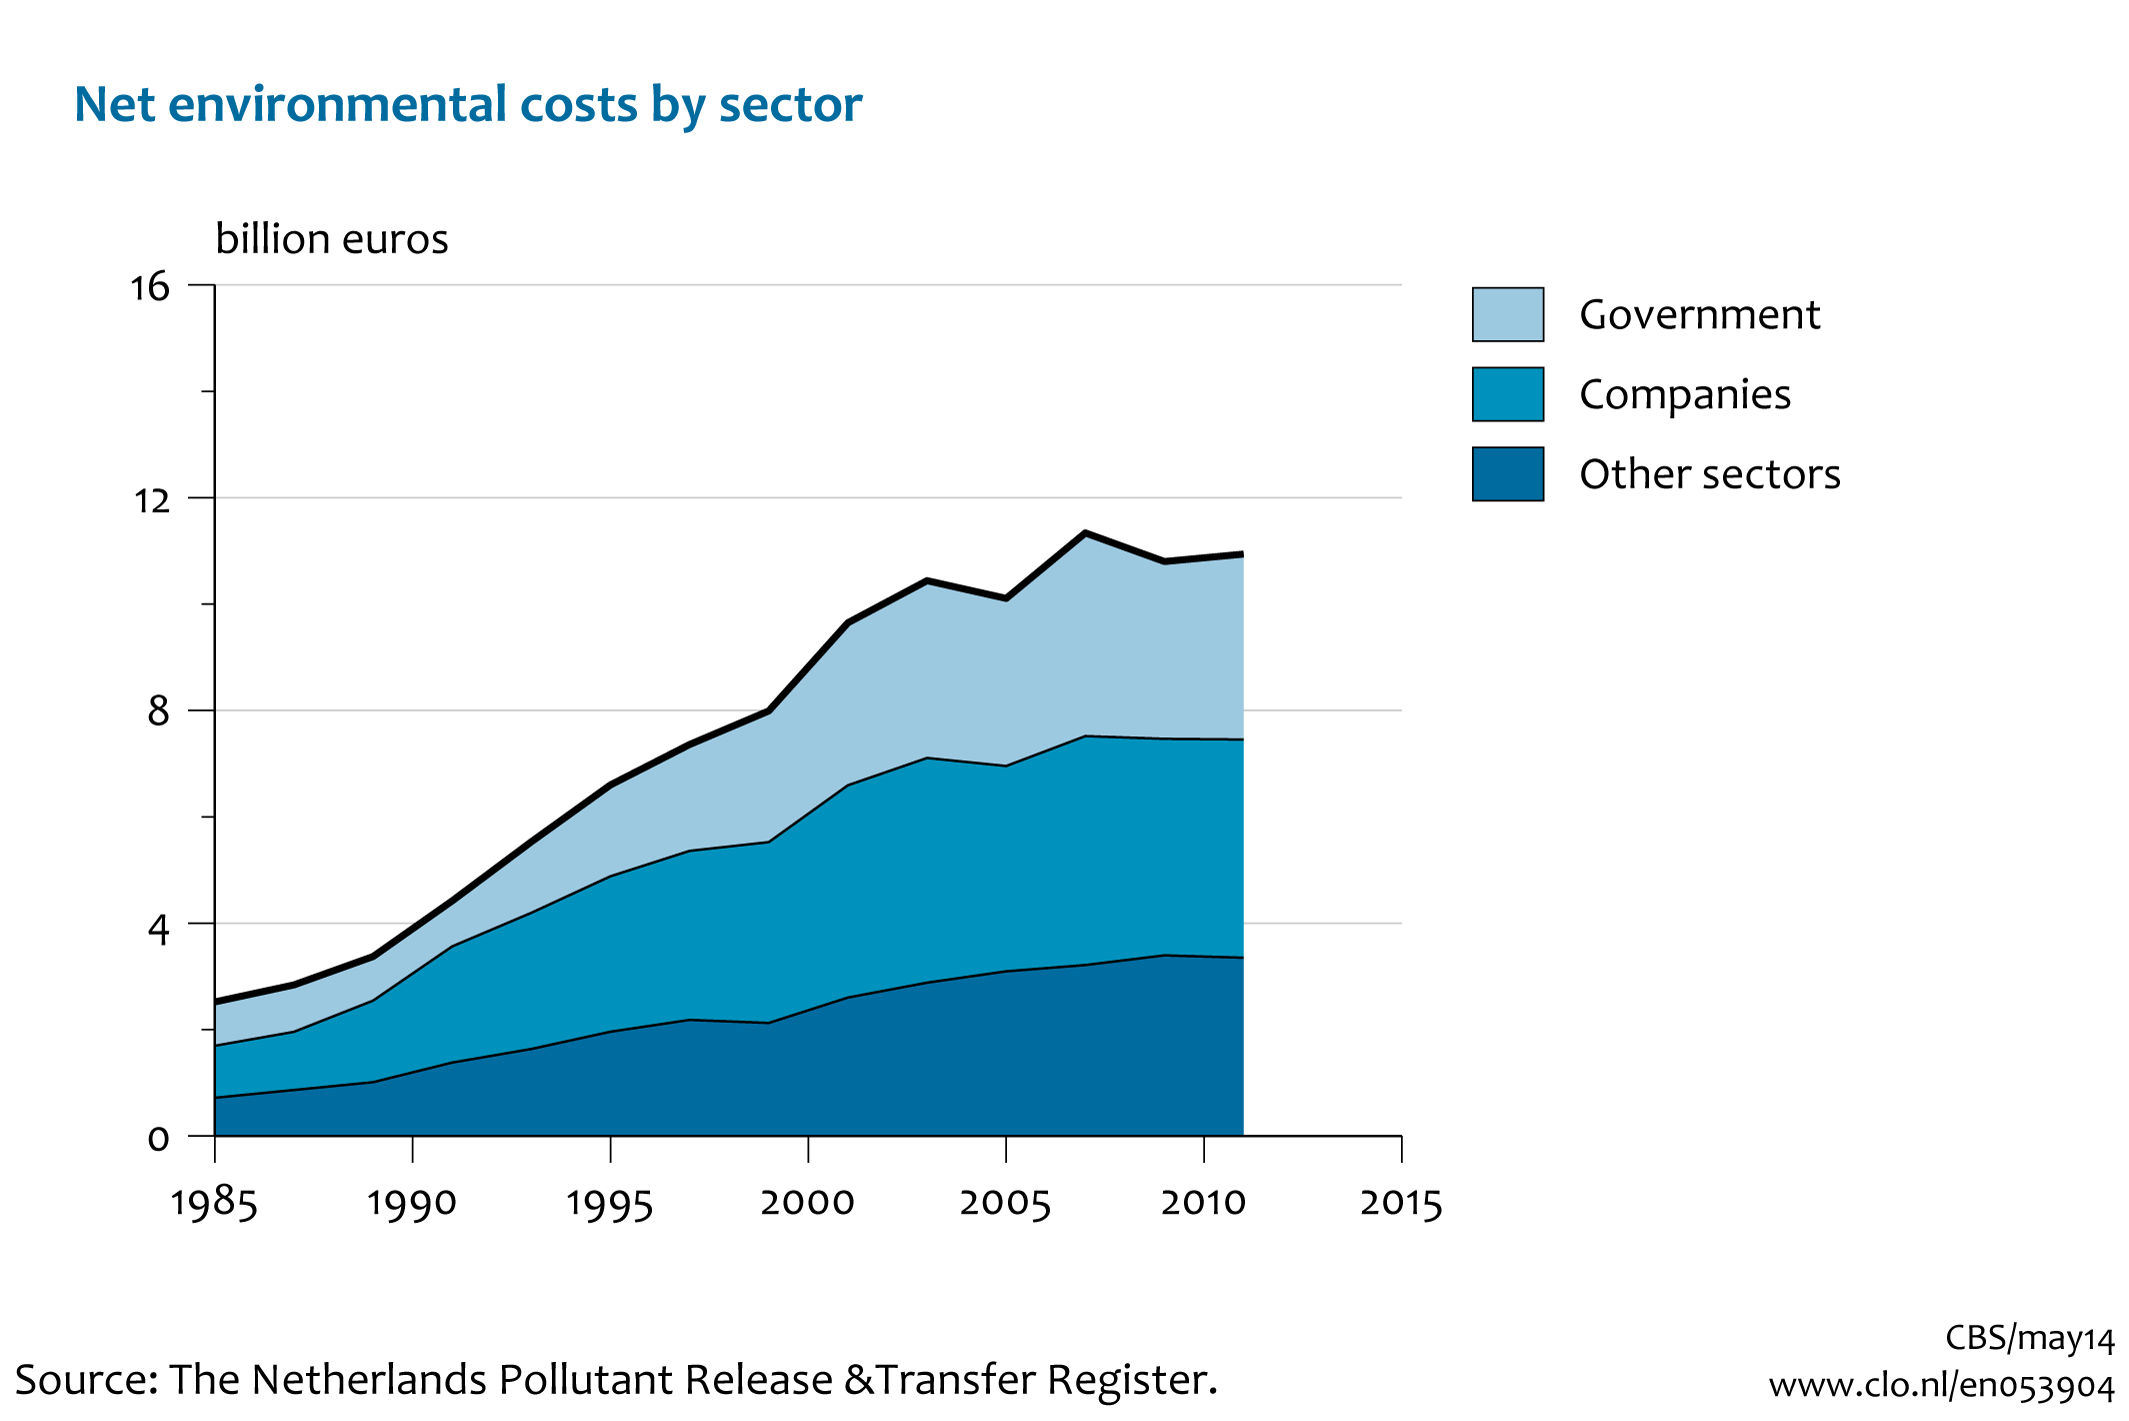 Image Net environmental costs by sector. The image is further explained in the text.